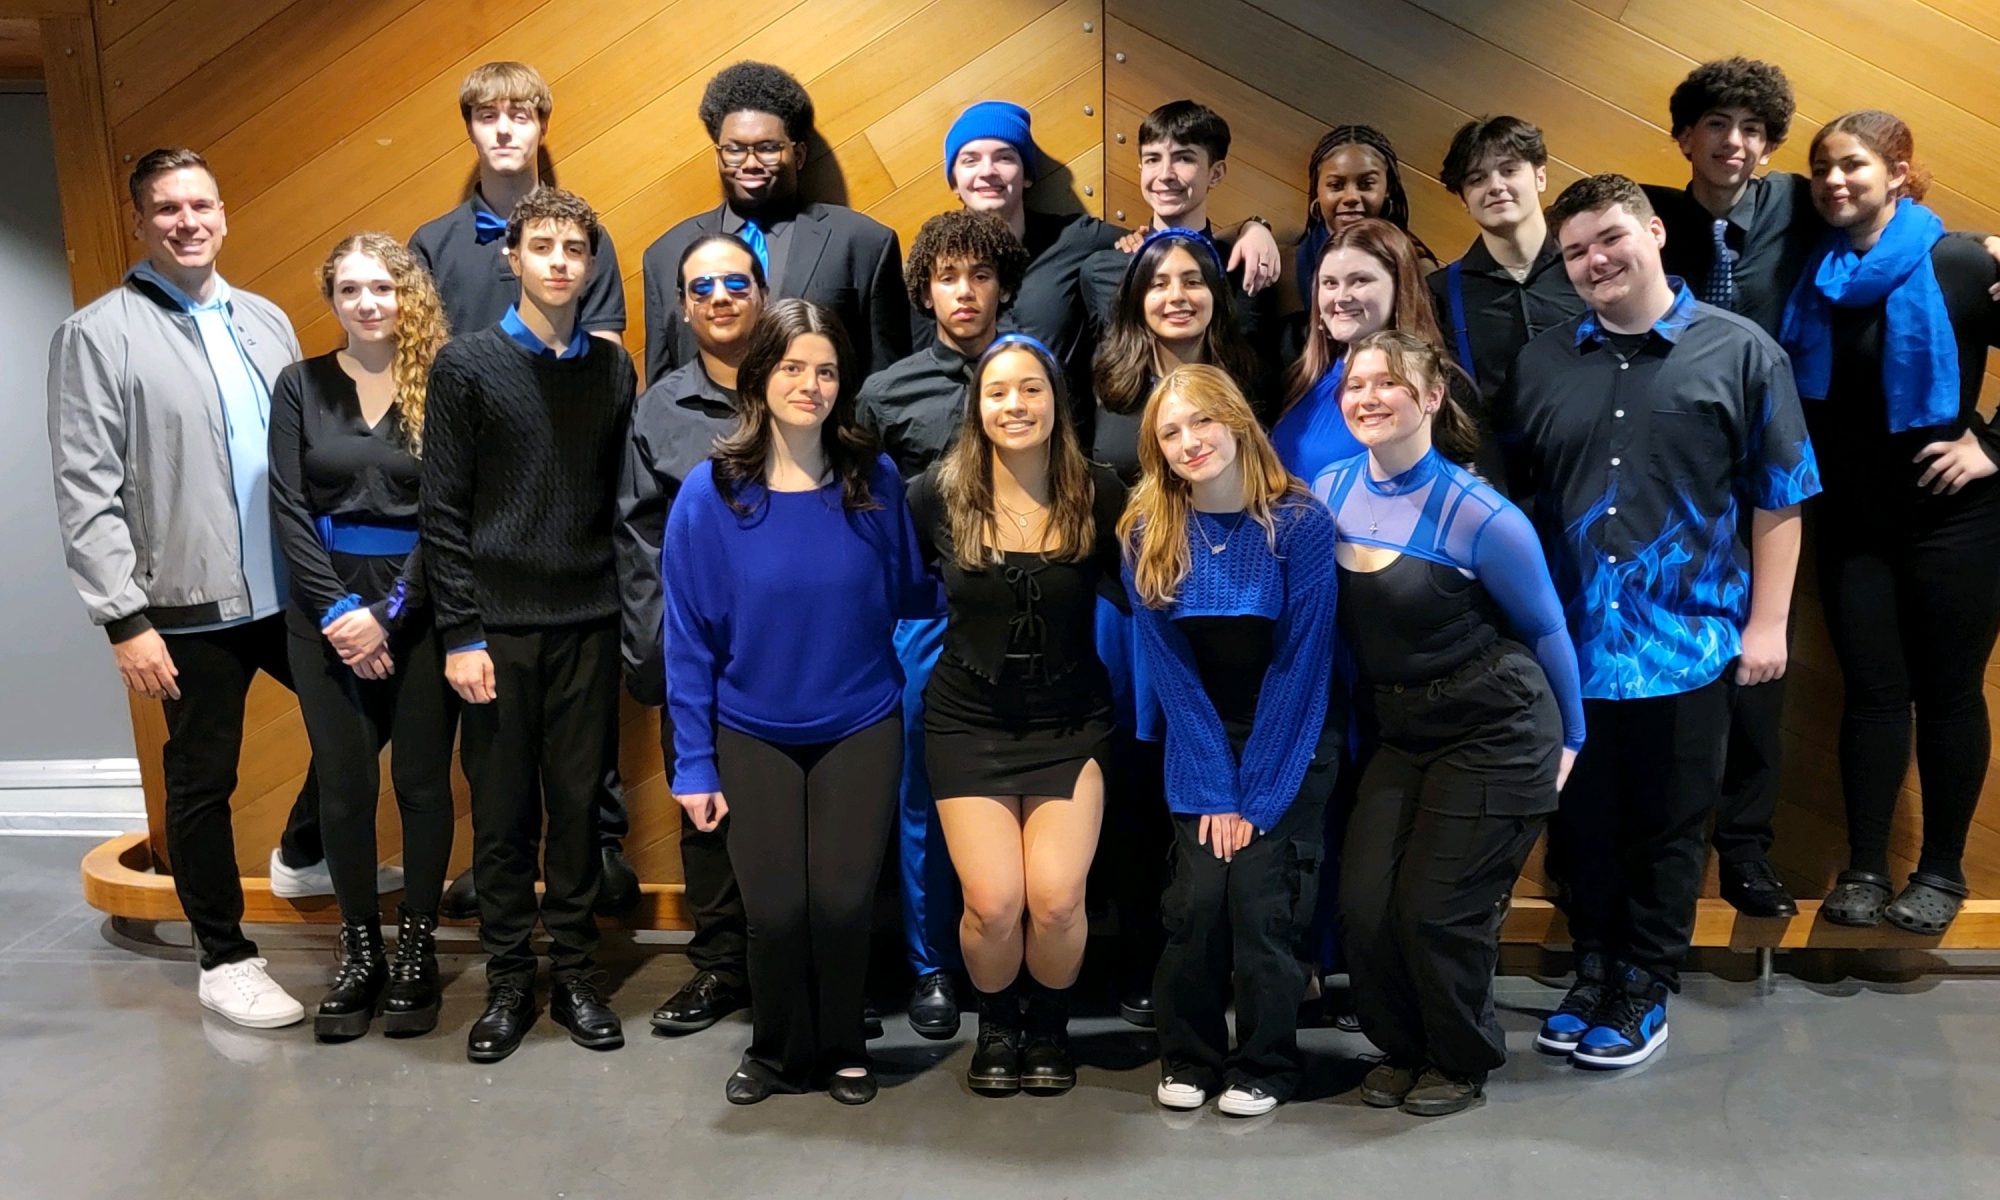 Members of the A Cappella group, Voxtones at the Quarterfinals